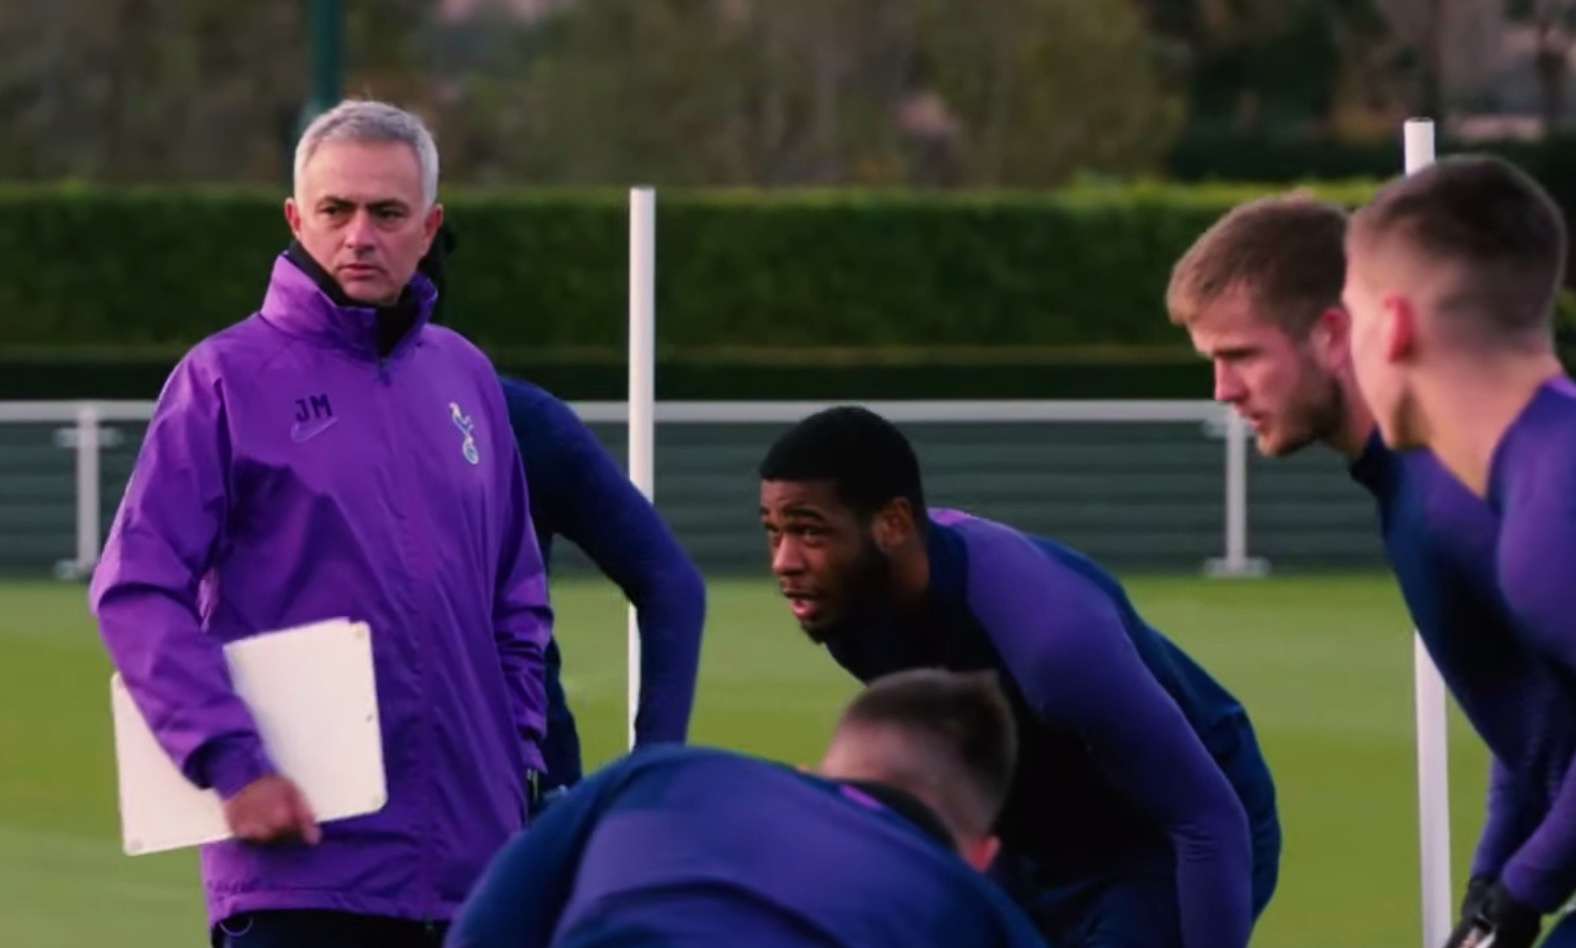 Photo – Jose Mourinho holds training session  for Tottenham players at a park amid global lockdown